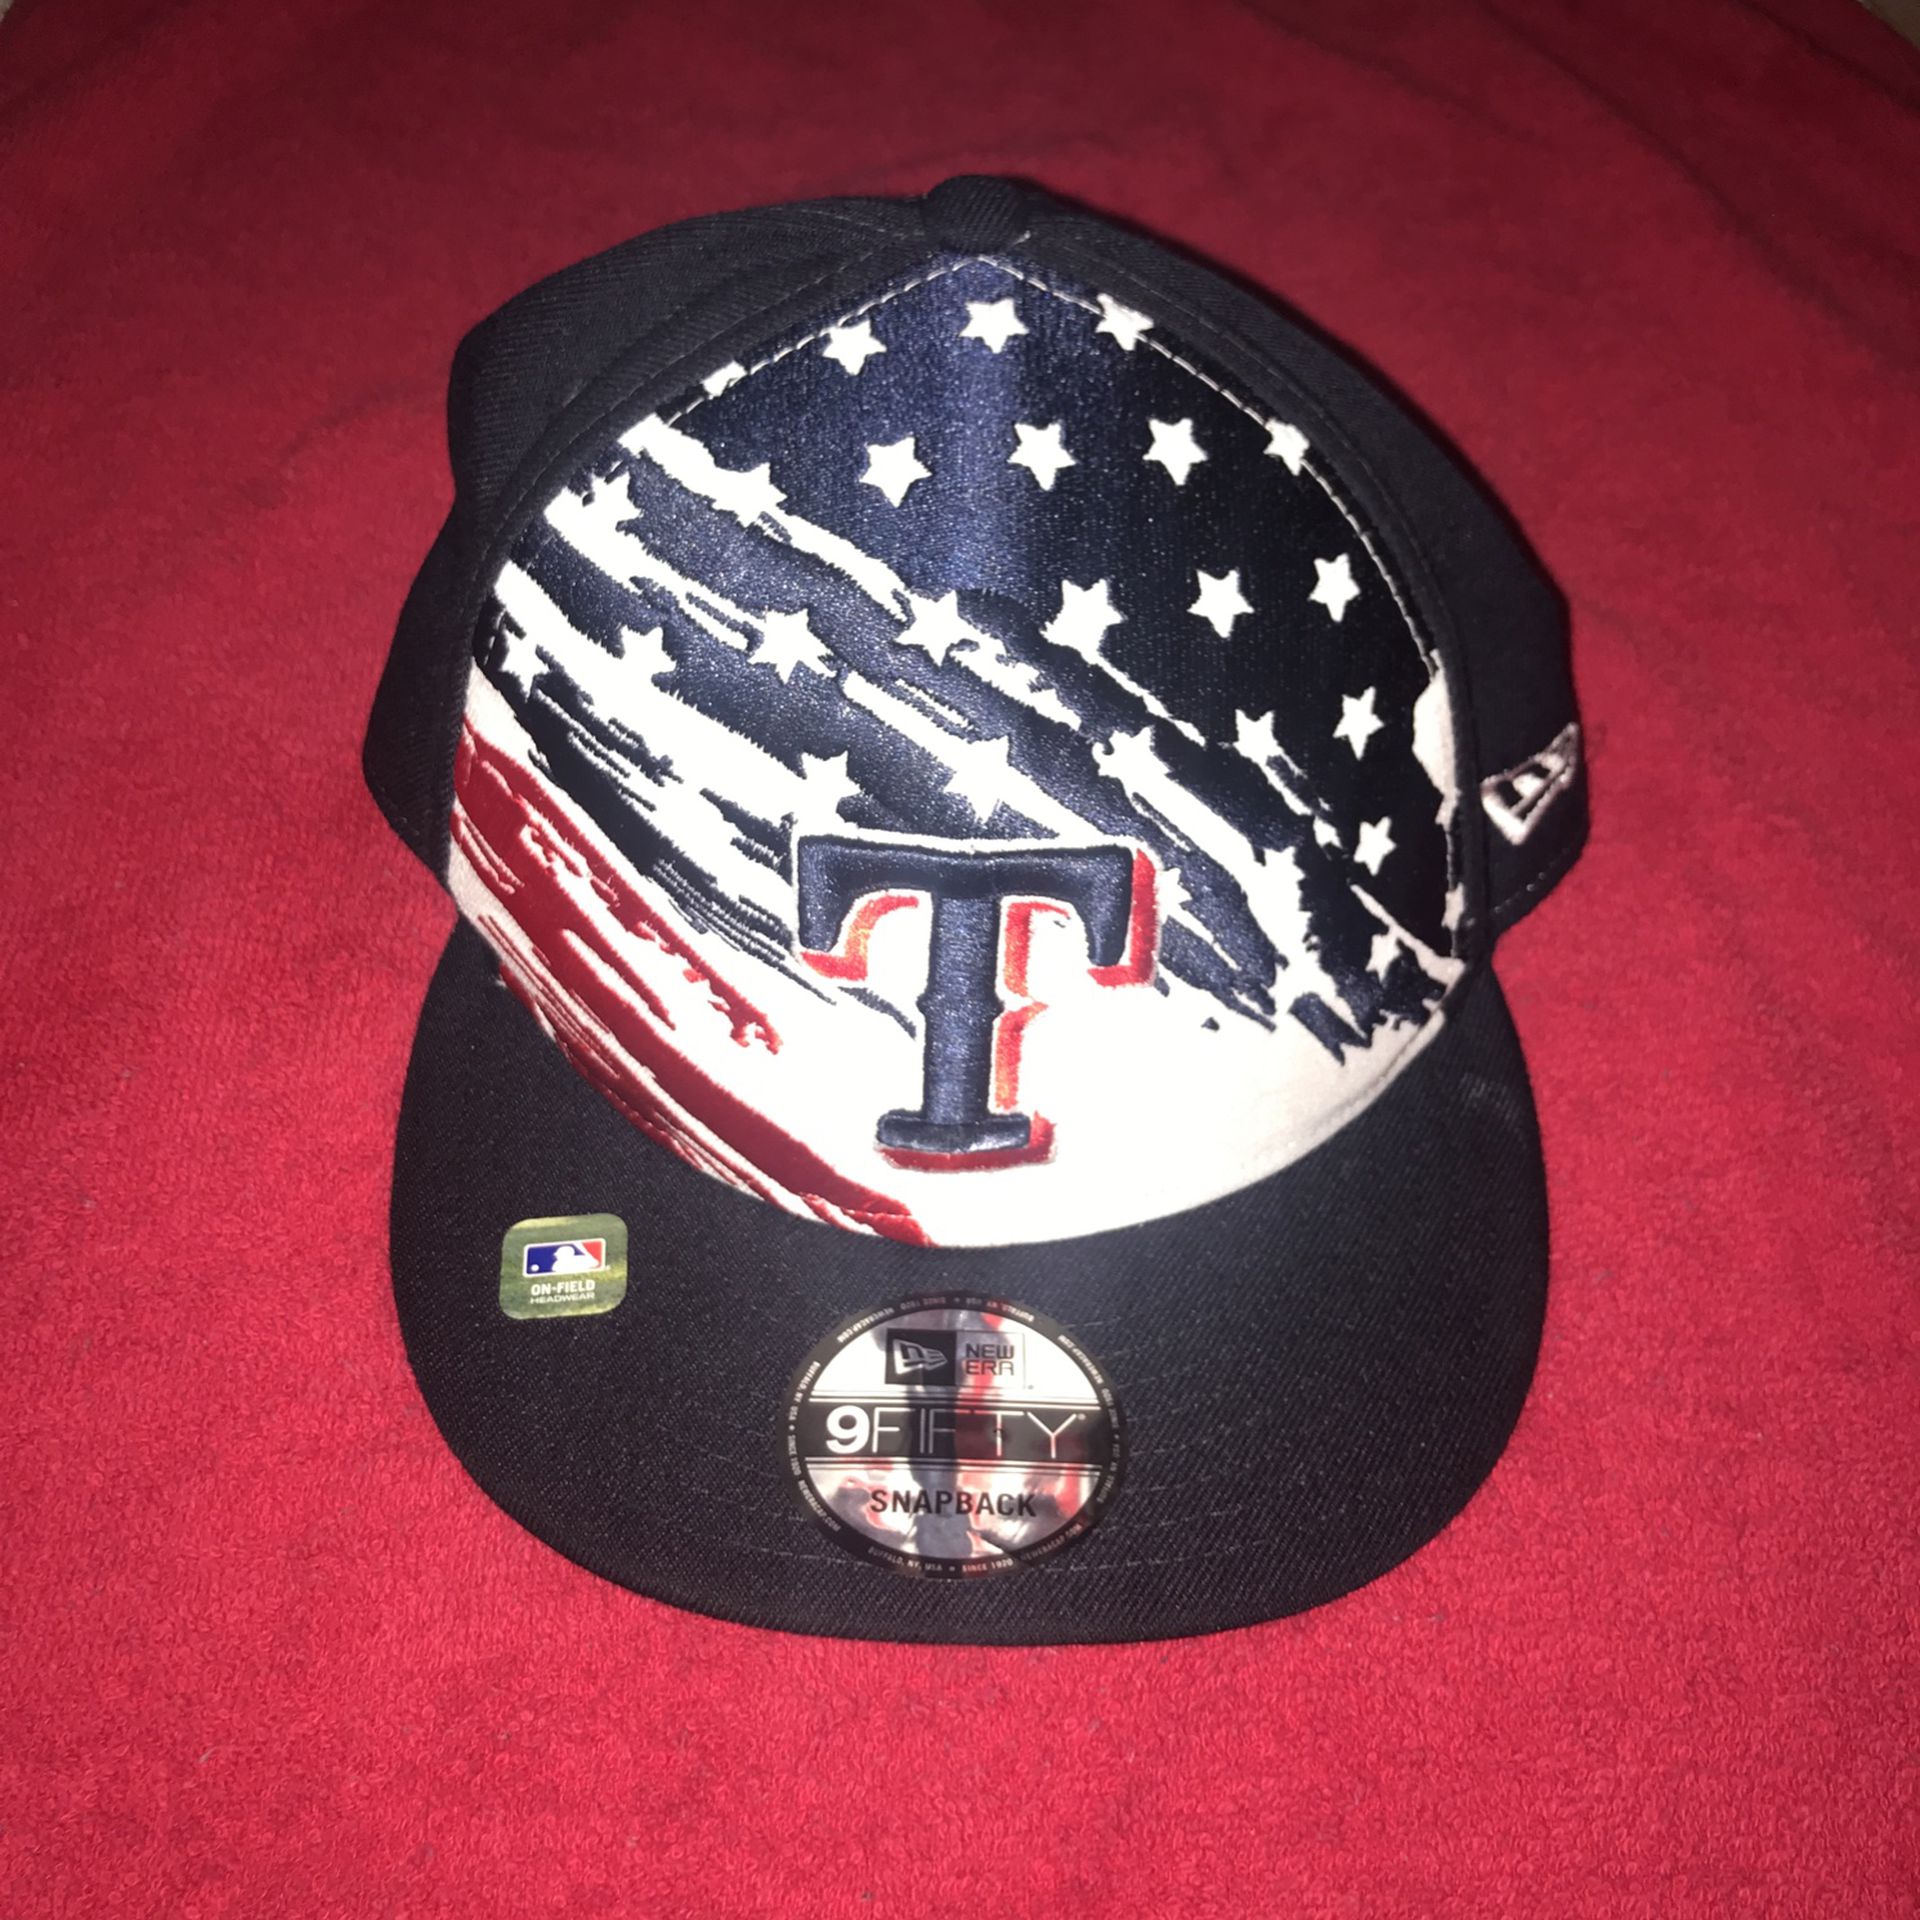 MLB New Era 2022 4th of July On-Field 59FIFTY Fitted Hat - Red